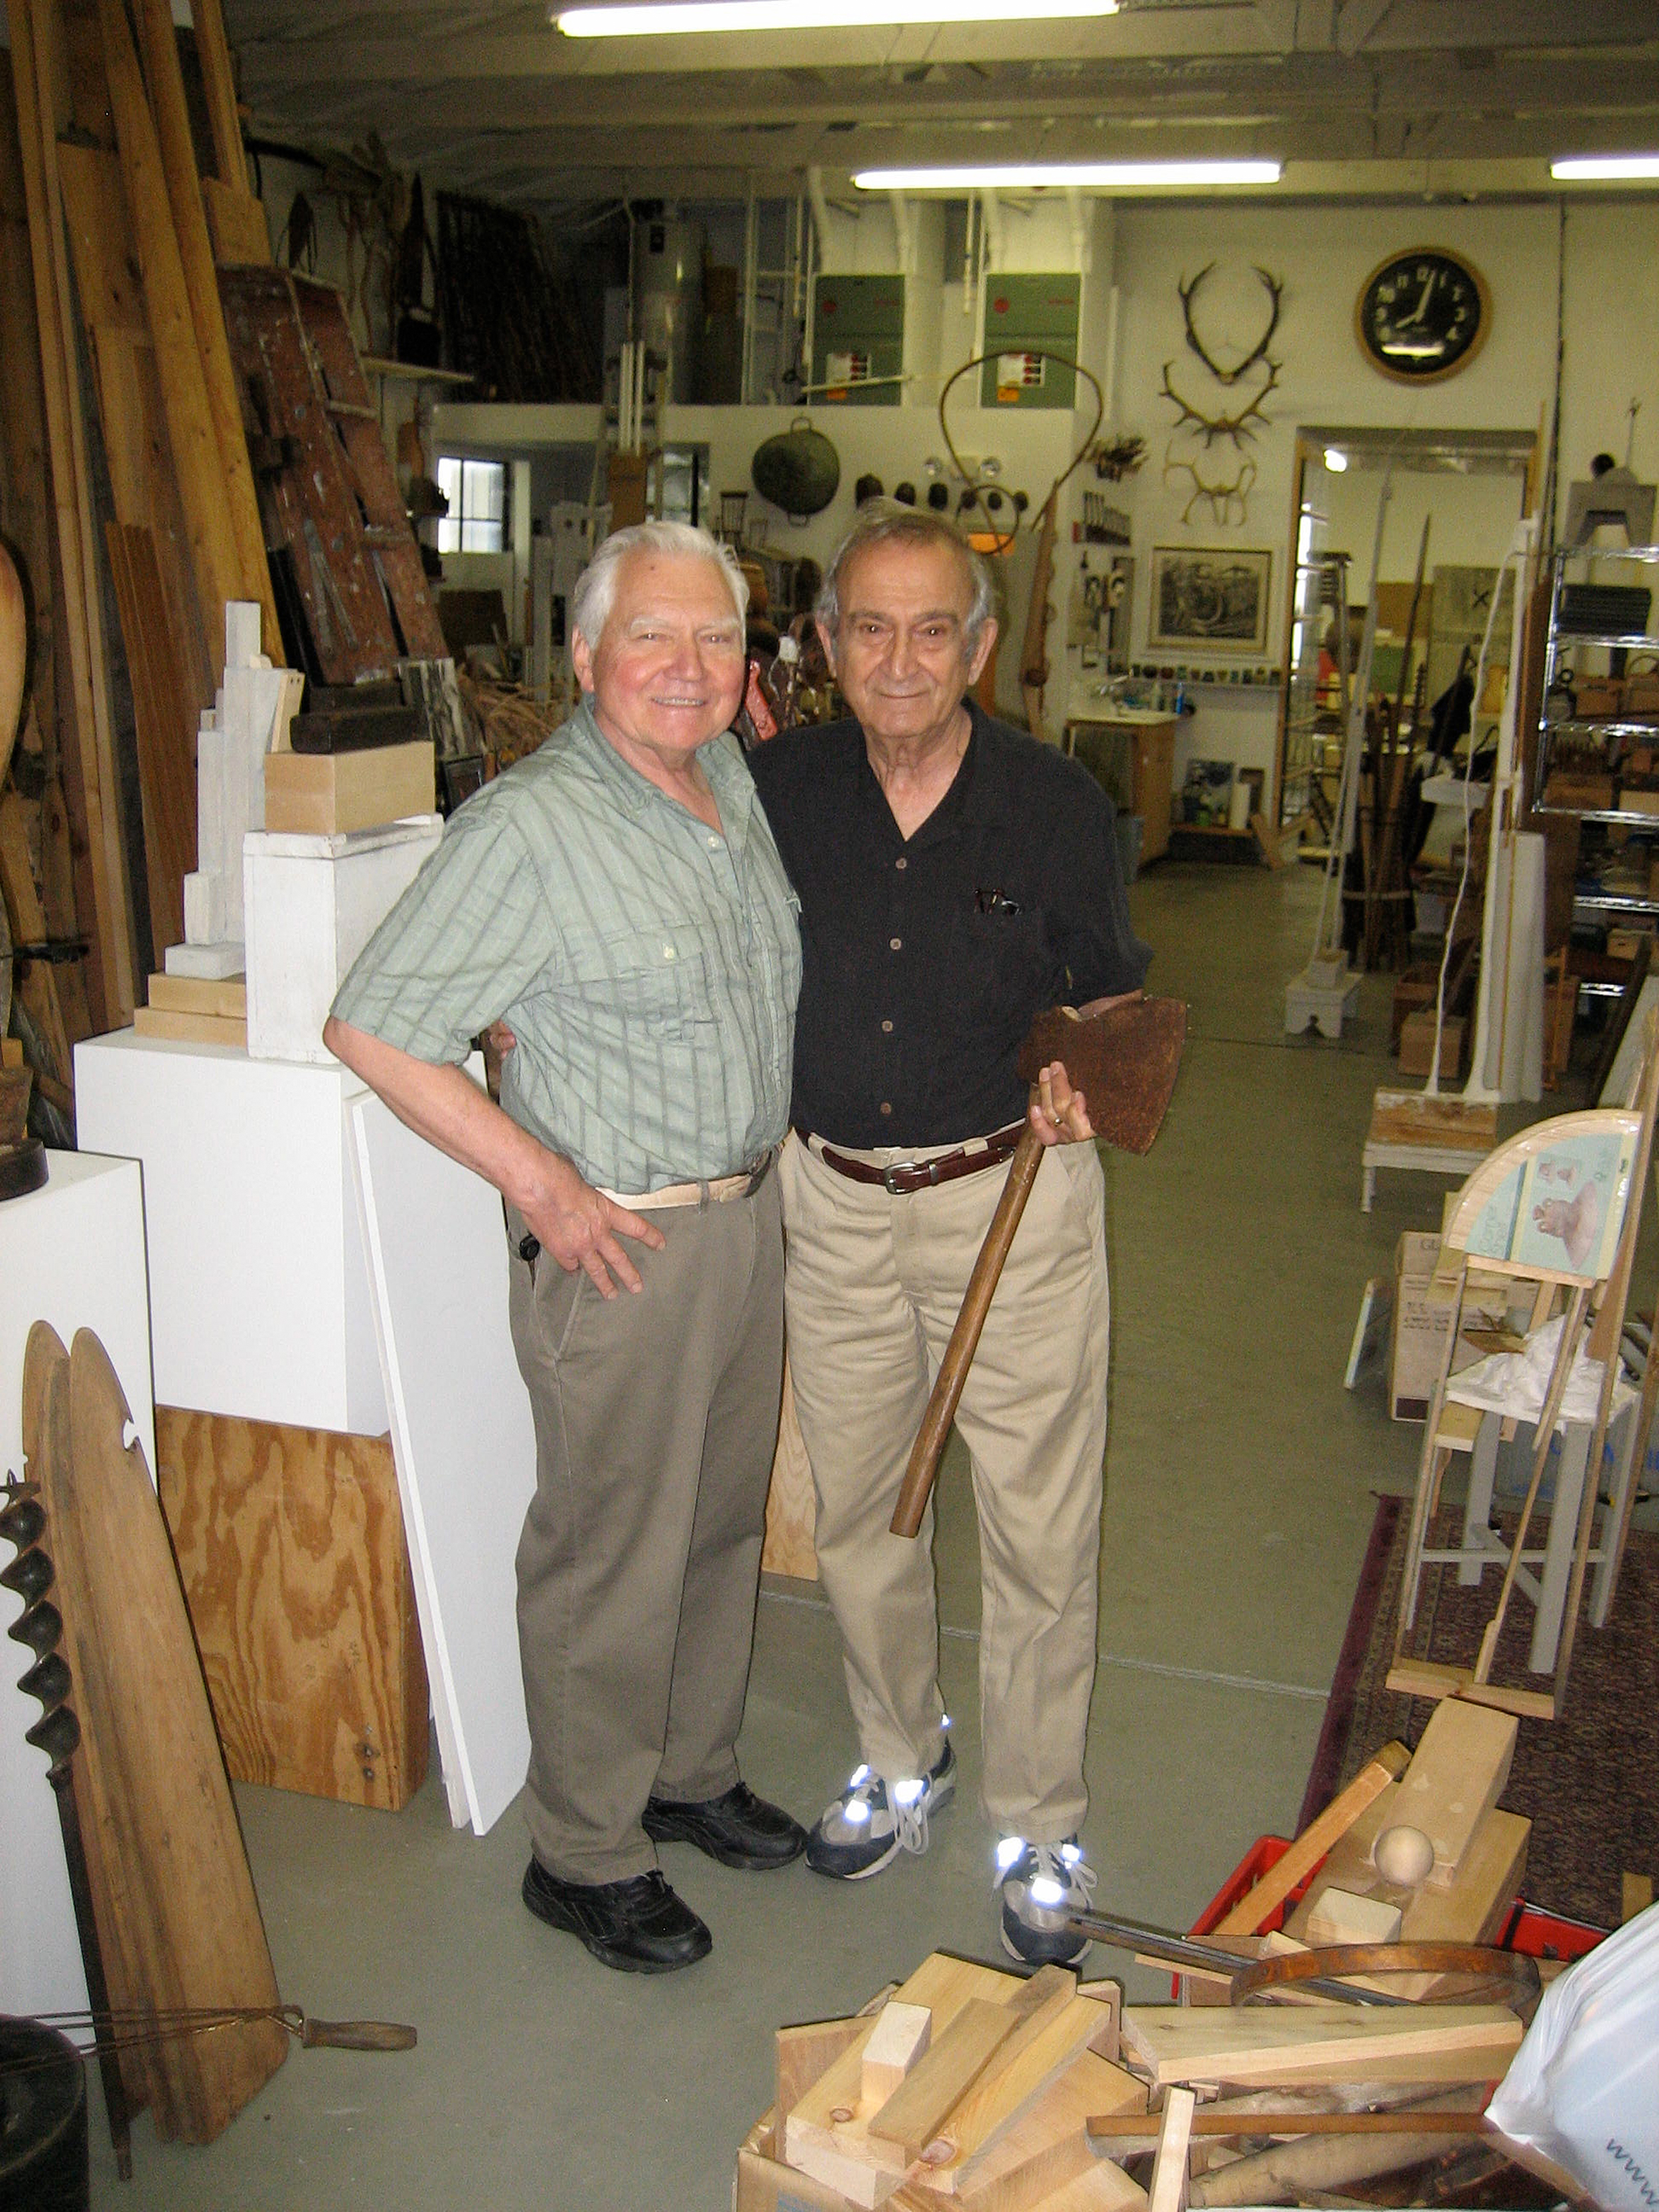   JU with his longtime and dear, close friend, colleague and admired mentor, Varujan Boghosian at JU's studio, 60 Croade St., Warren RI. July 22, 2008  